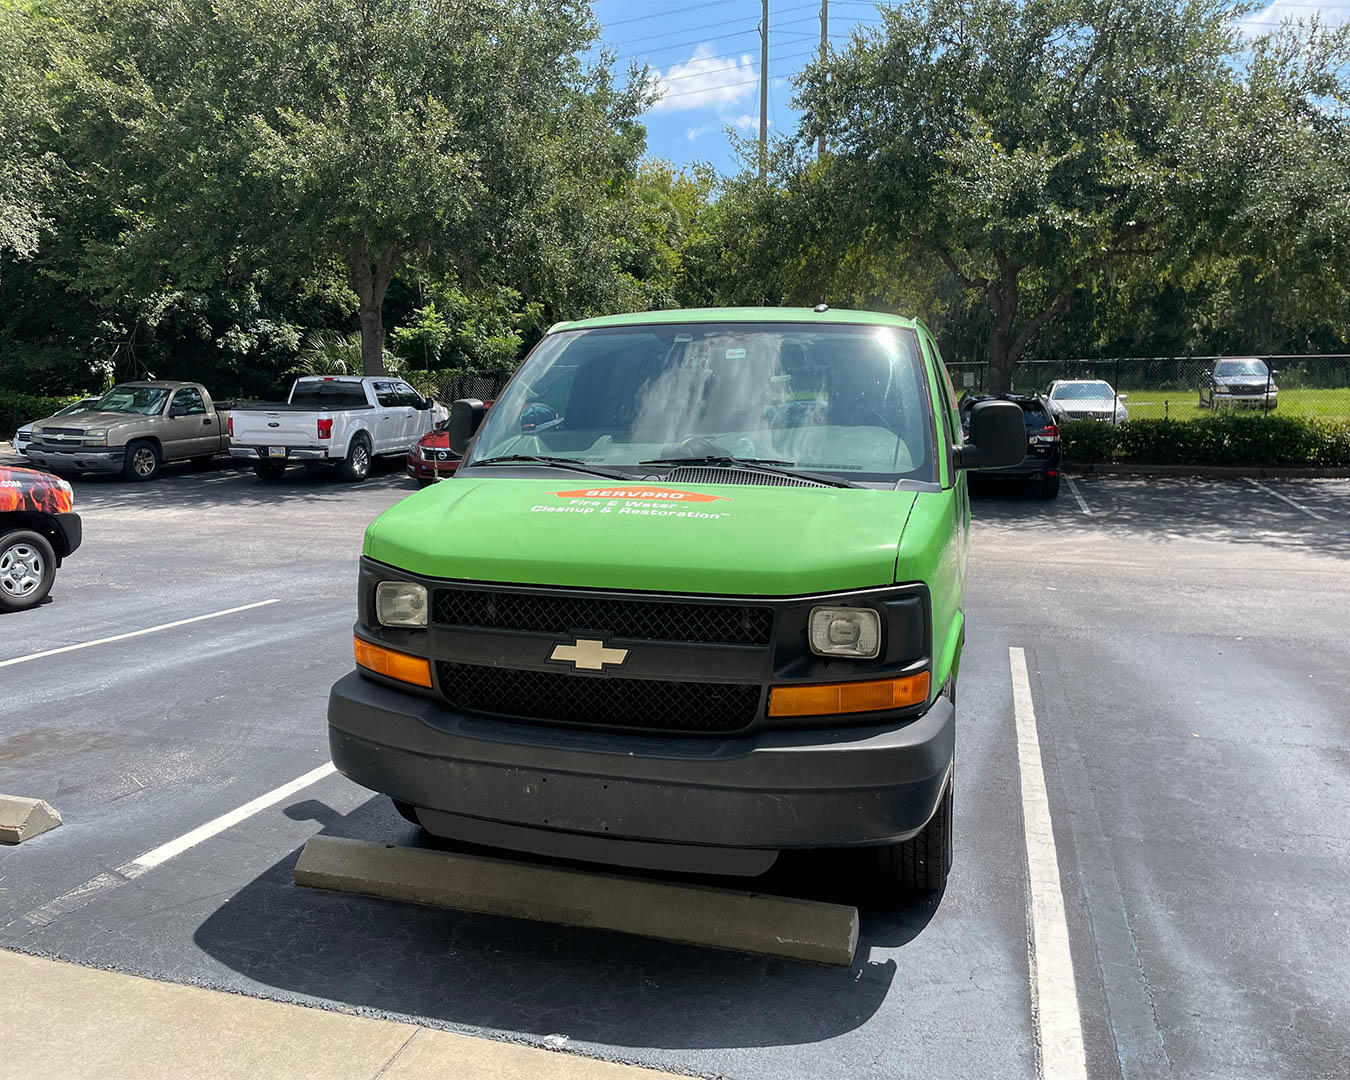 Flooding and water emergencies don’t wait for regular business hours and neither do we. SERVPRO of Lake Mary, Heathrow provides emergency cleaning and restoration services 24 hours a day, 7 days a week—including all holidays. You can expect an immediate response time, day or night.